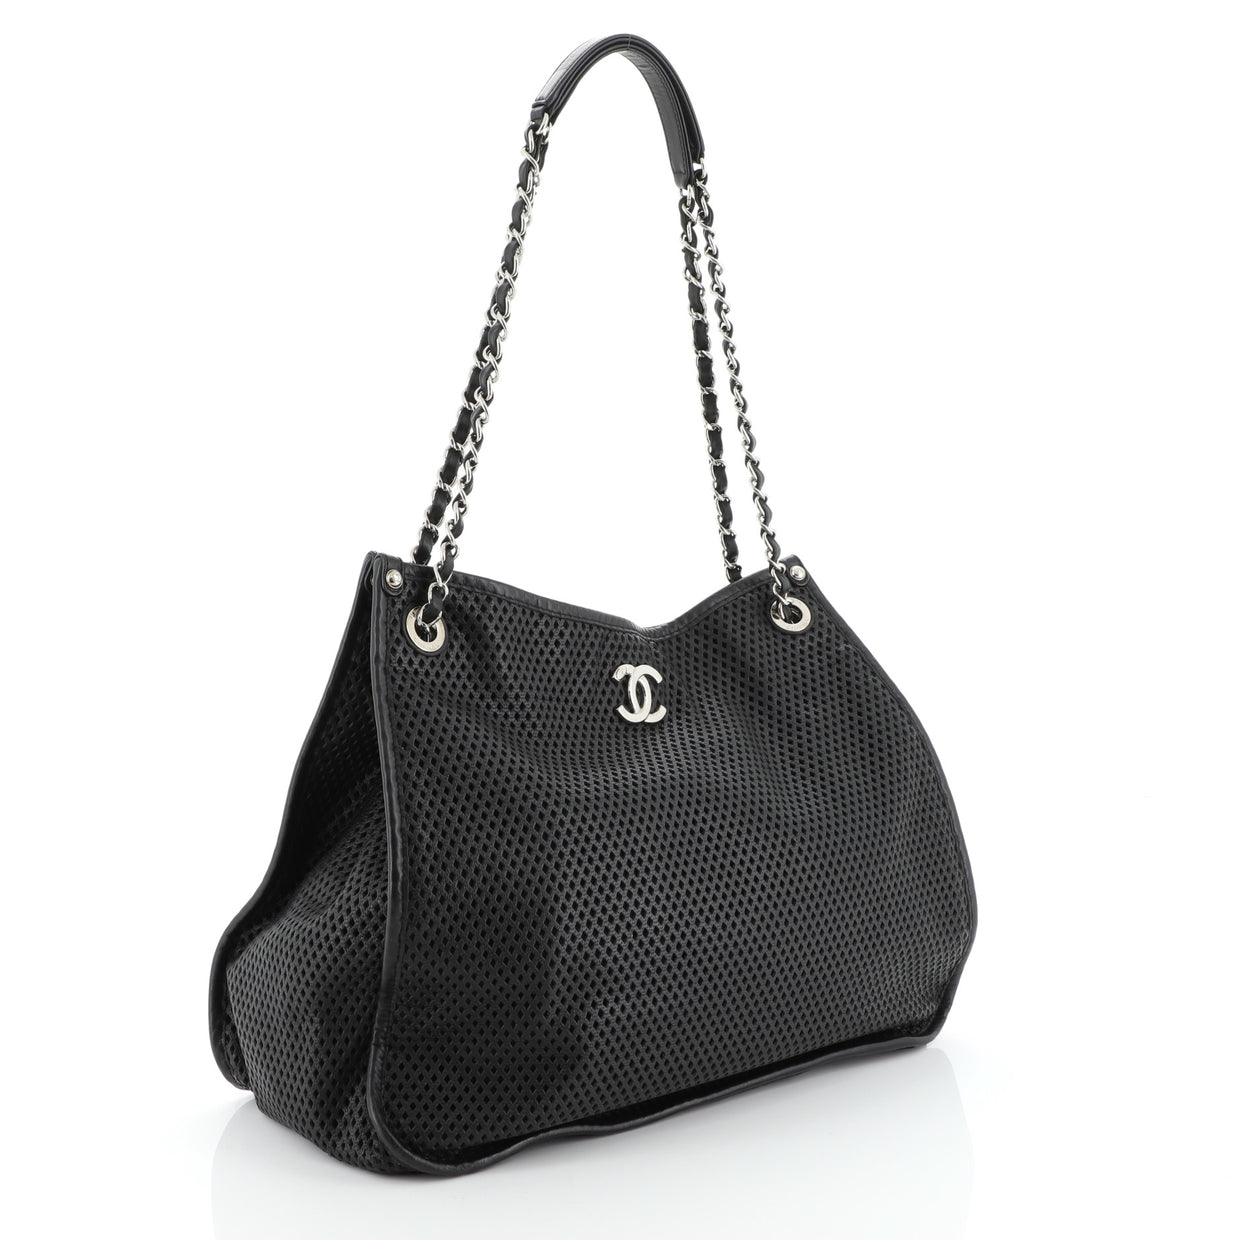 Chanel Up In The Air Tote Perforated Leather - Rebag